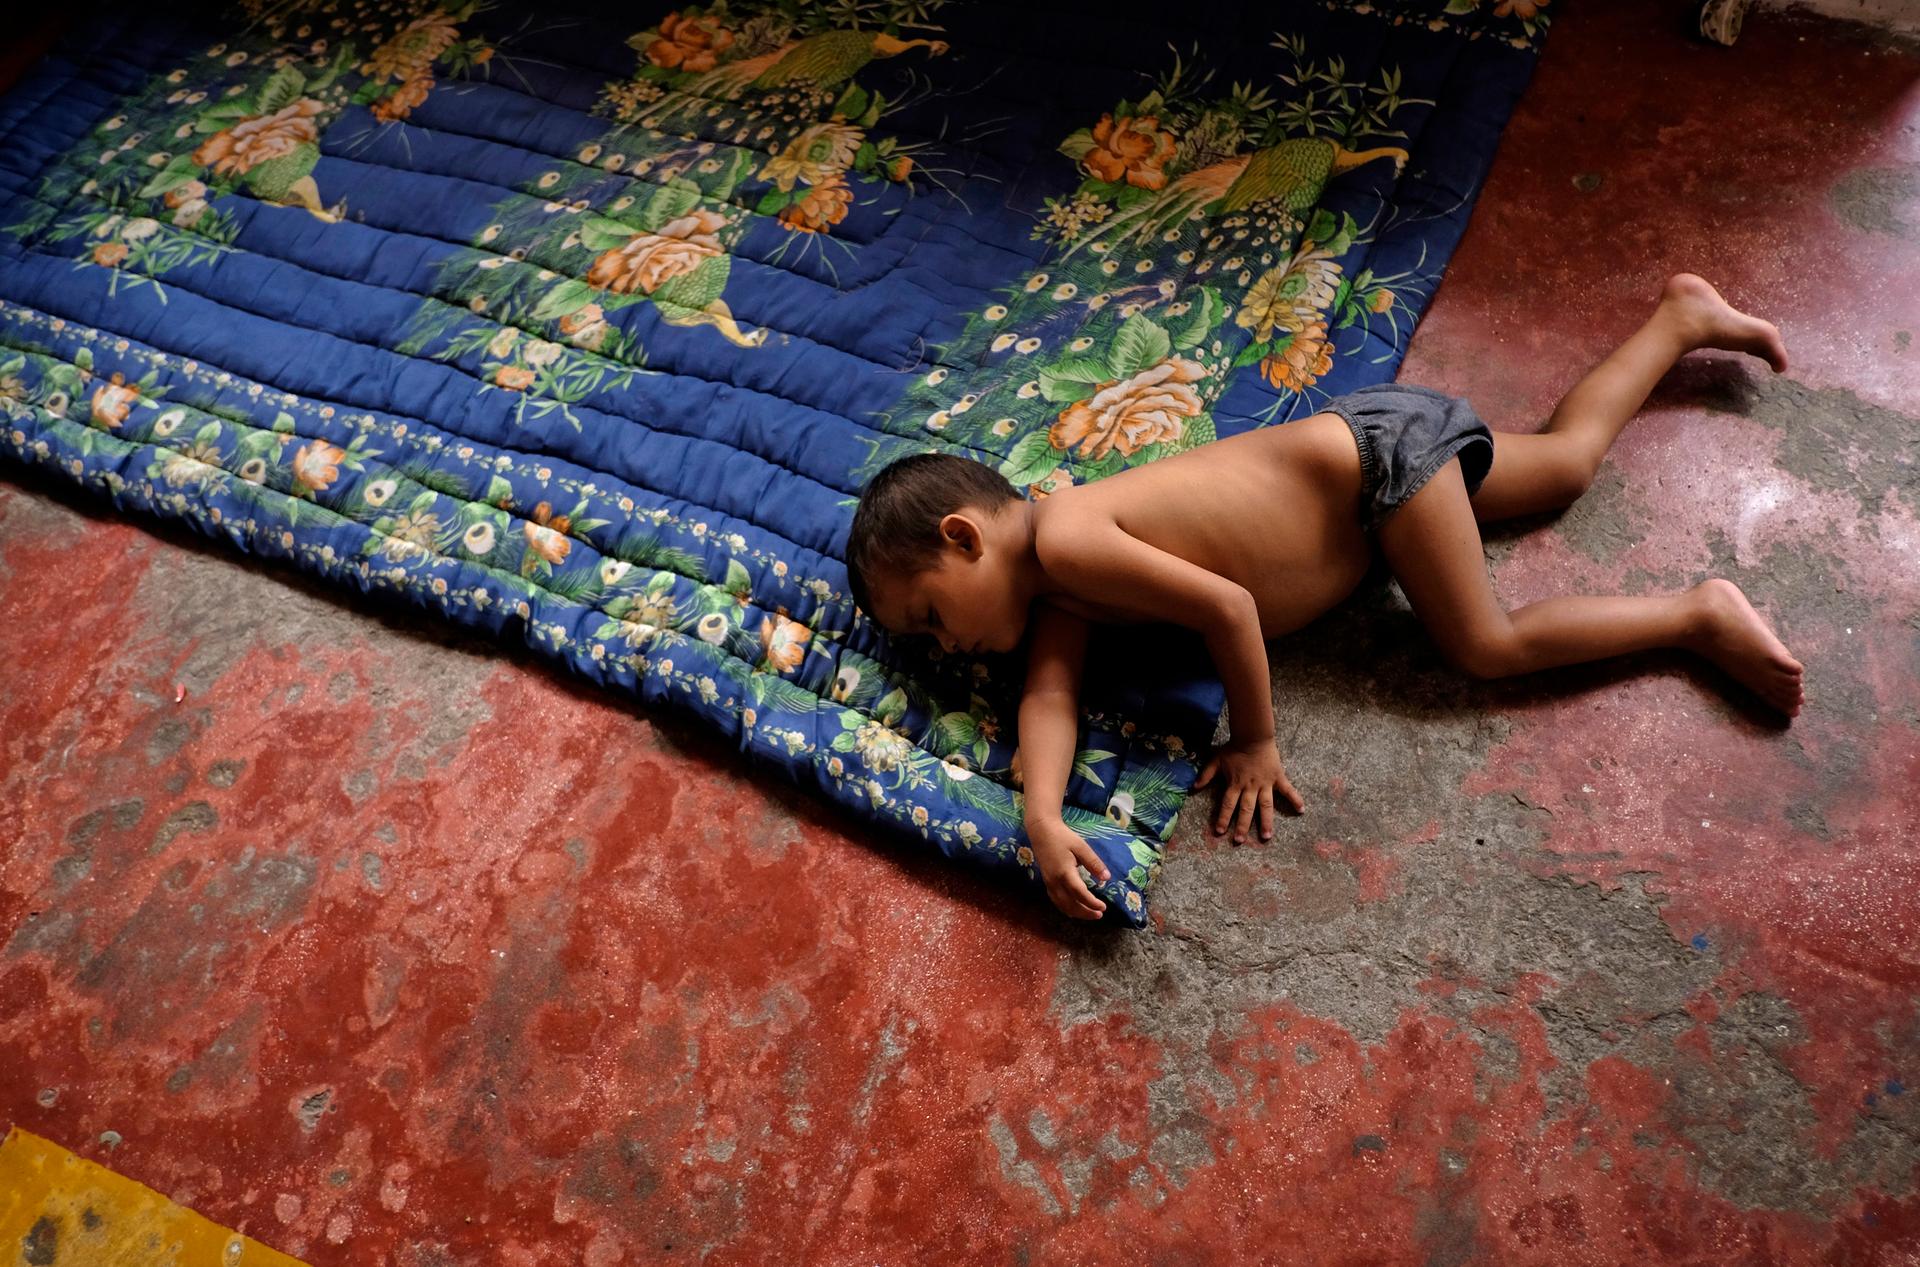 A Honduran child sleeps at an immigrant shelter in Chiapas, in southern Mexico.  His is traveling with his family from his impoverished and violent neighborhood to northern Mexico or the US.